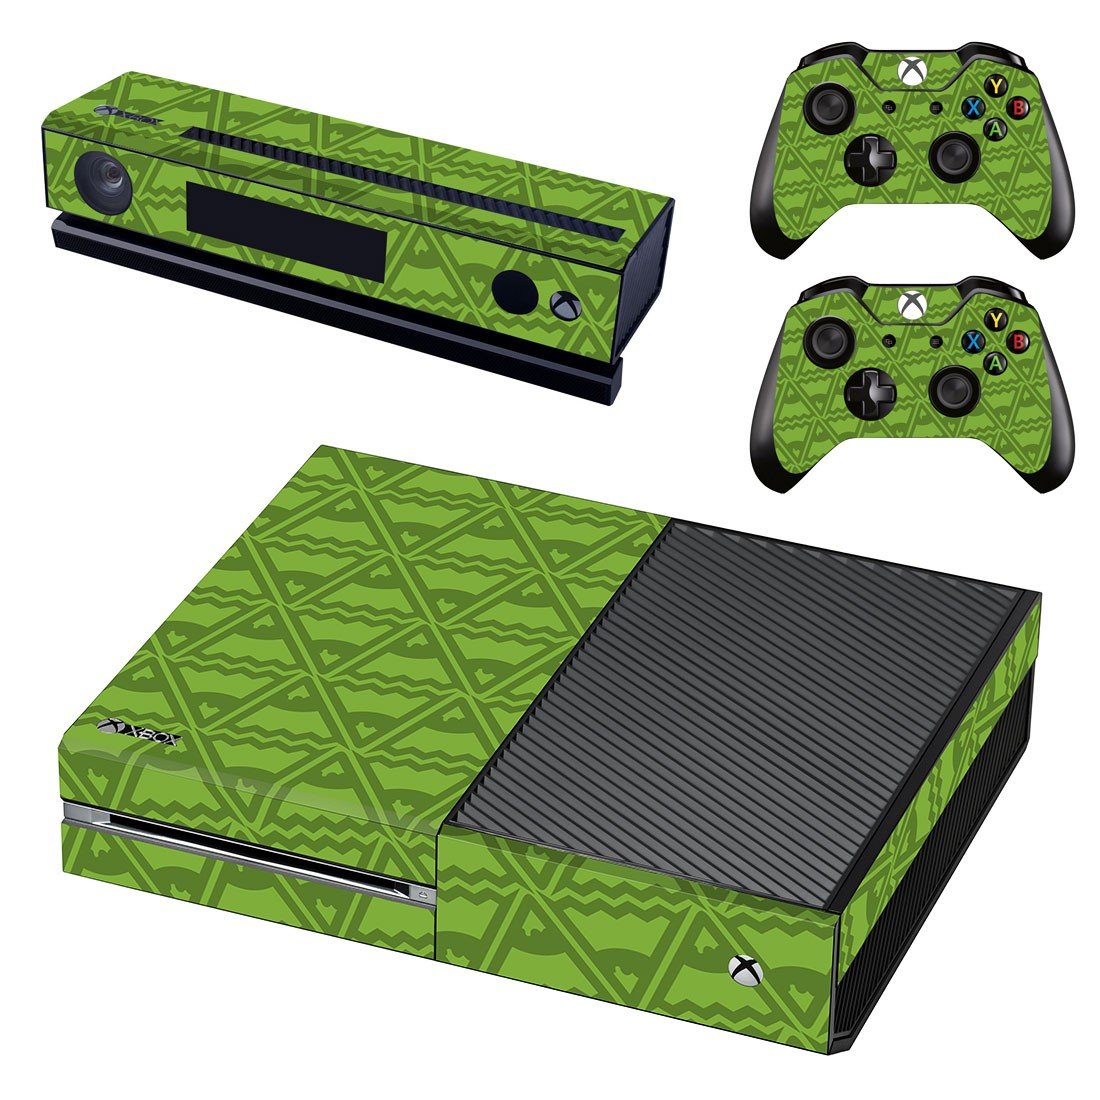 Traingle Pattern Cover For Xbox One